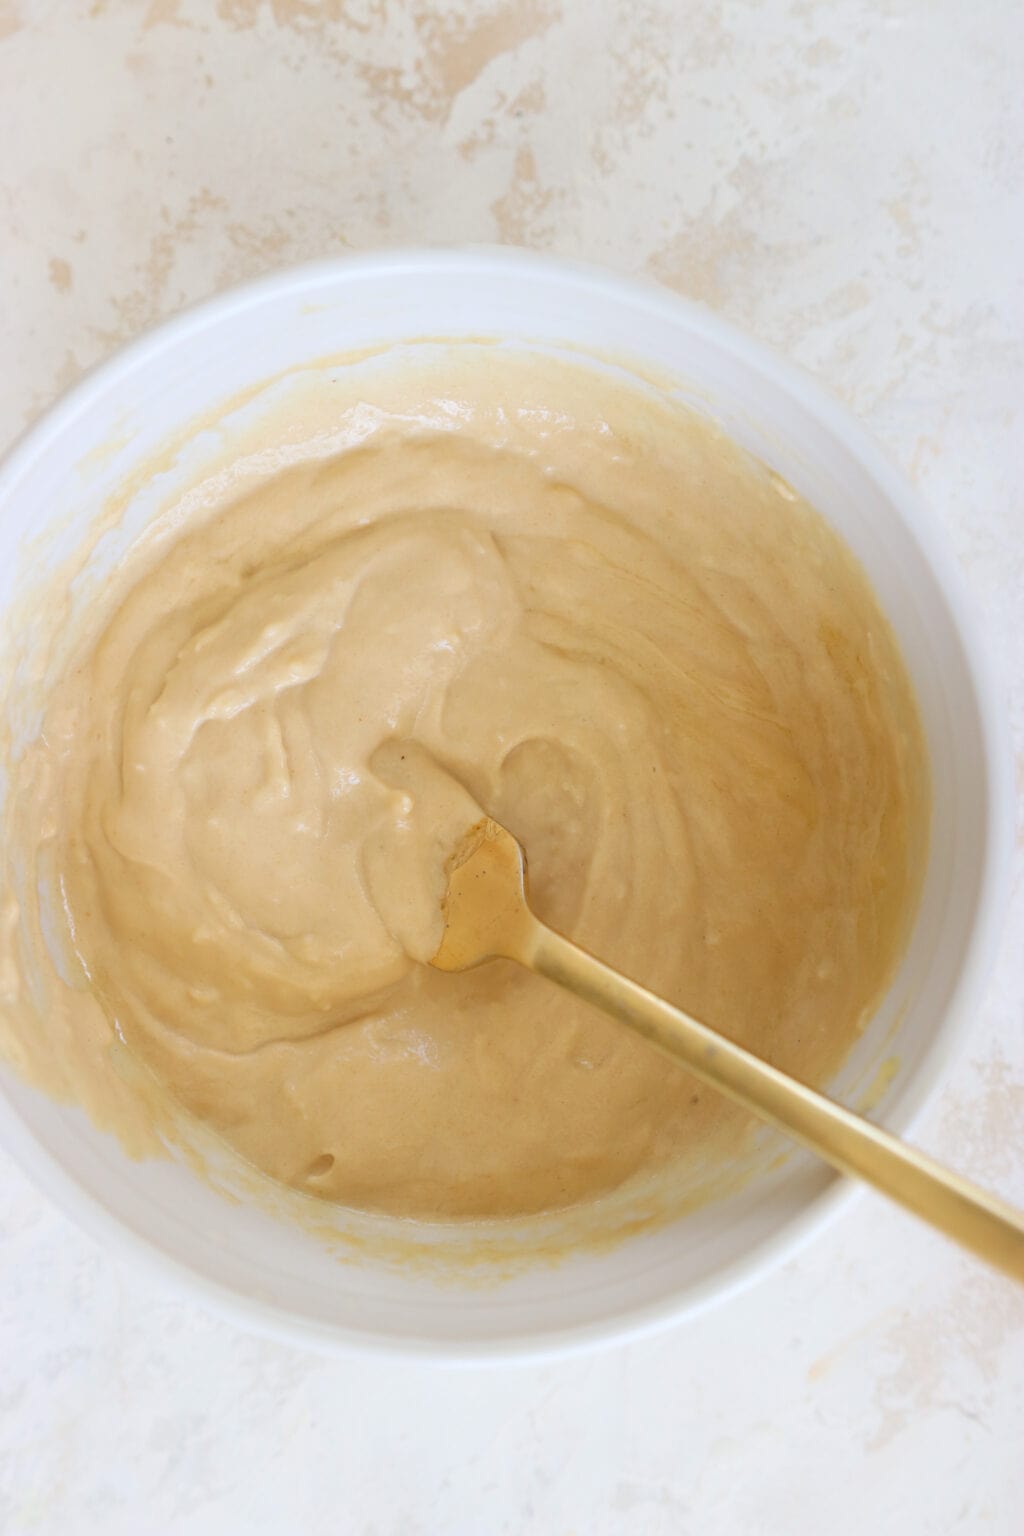 Lemon tahini sauce in a white bowl with a gold spoon